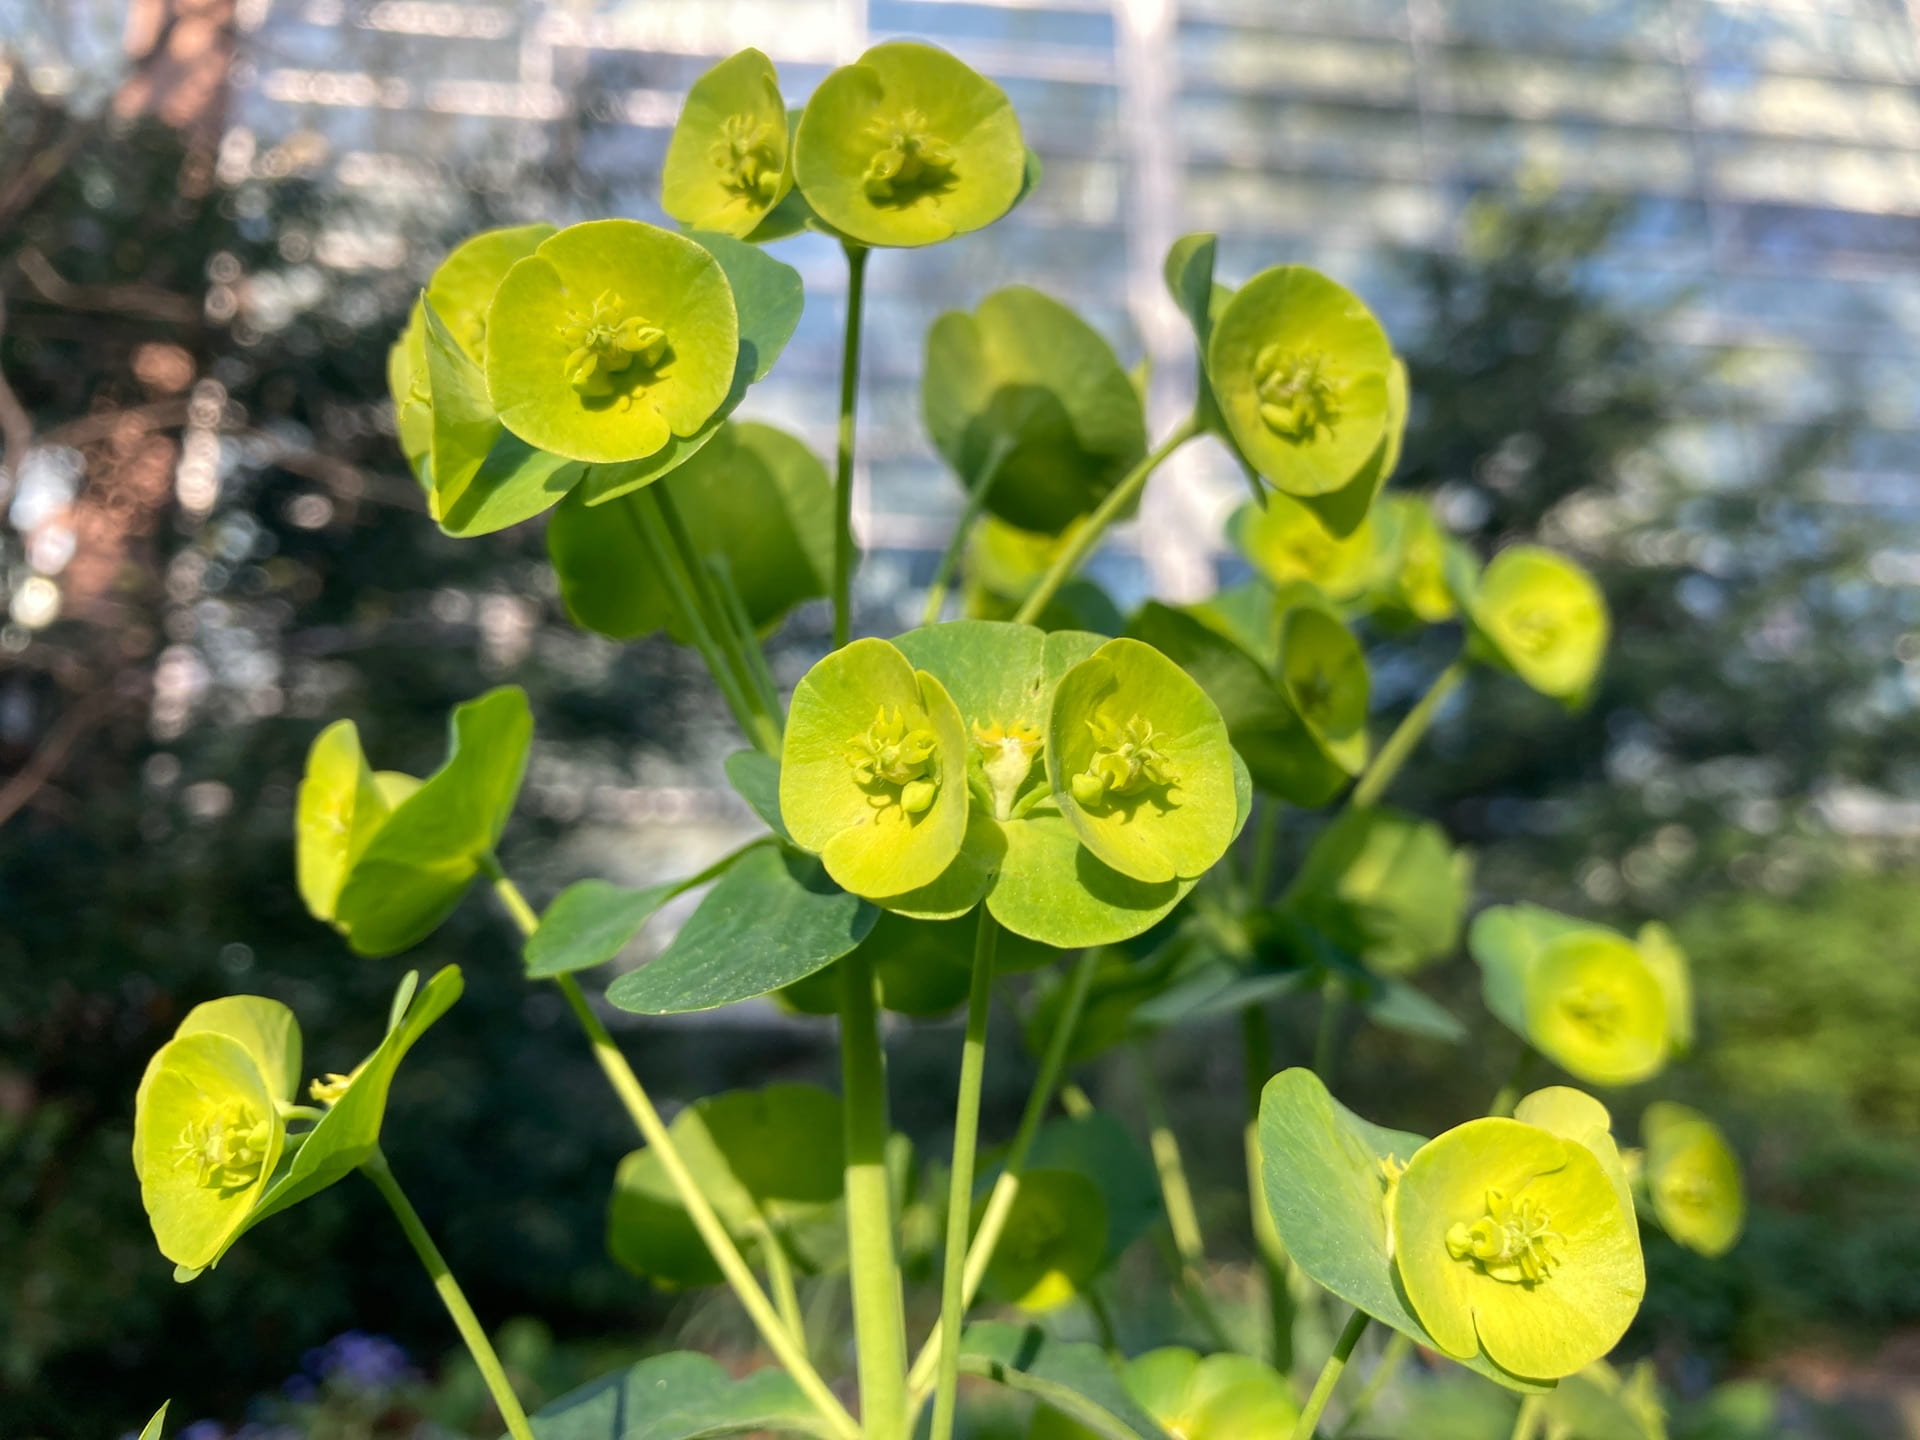 Flowers of the wood spurge, Euphorbia amygdaloids var. robbiae, are an electric green.